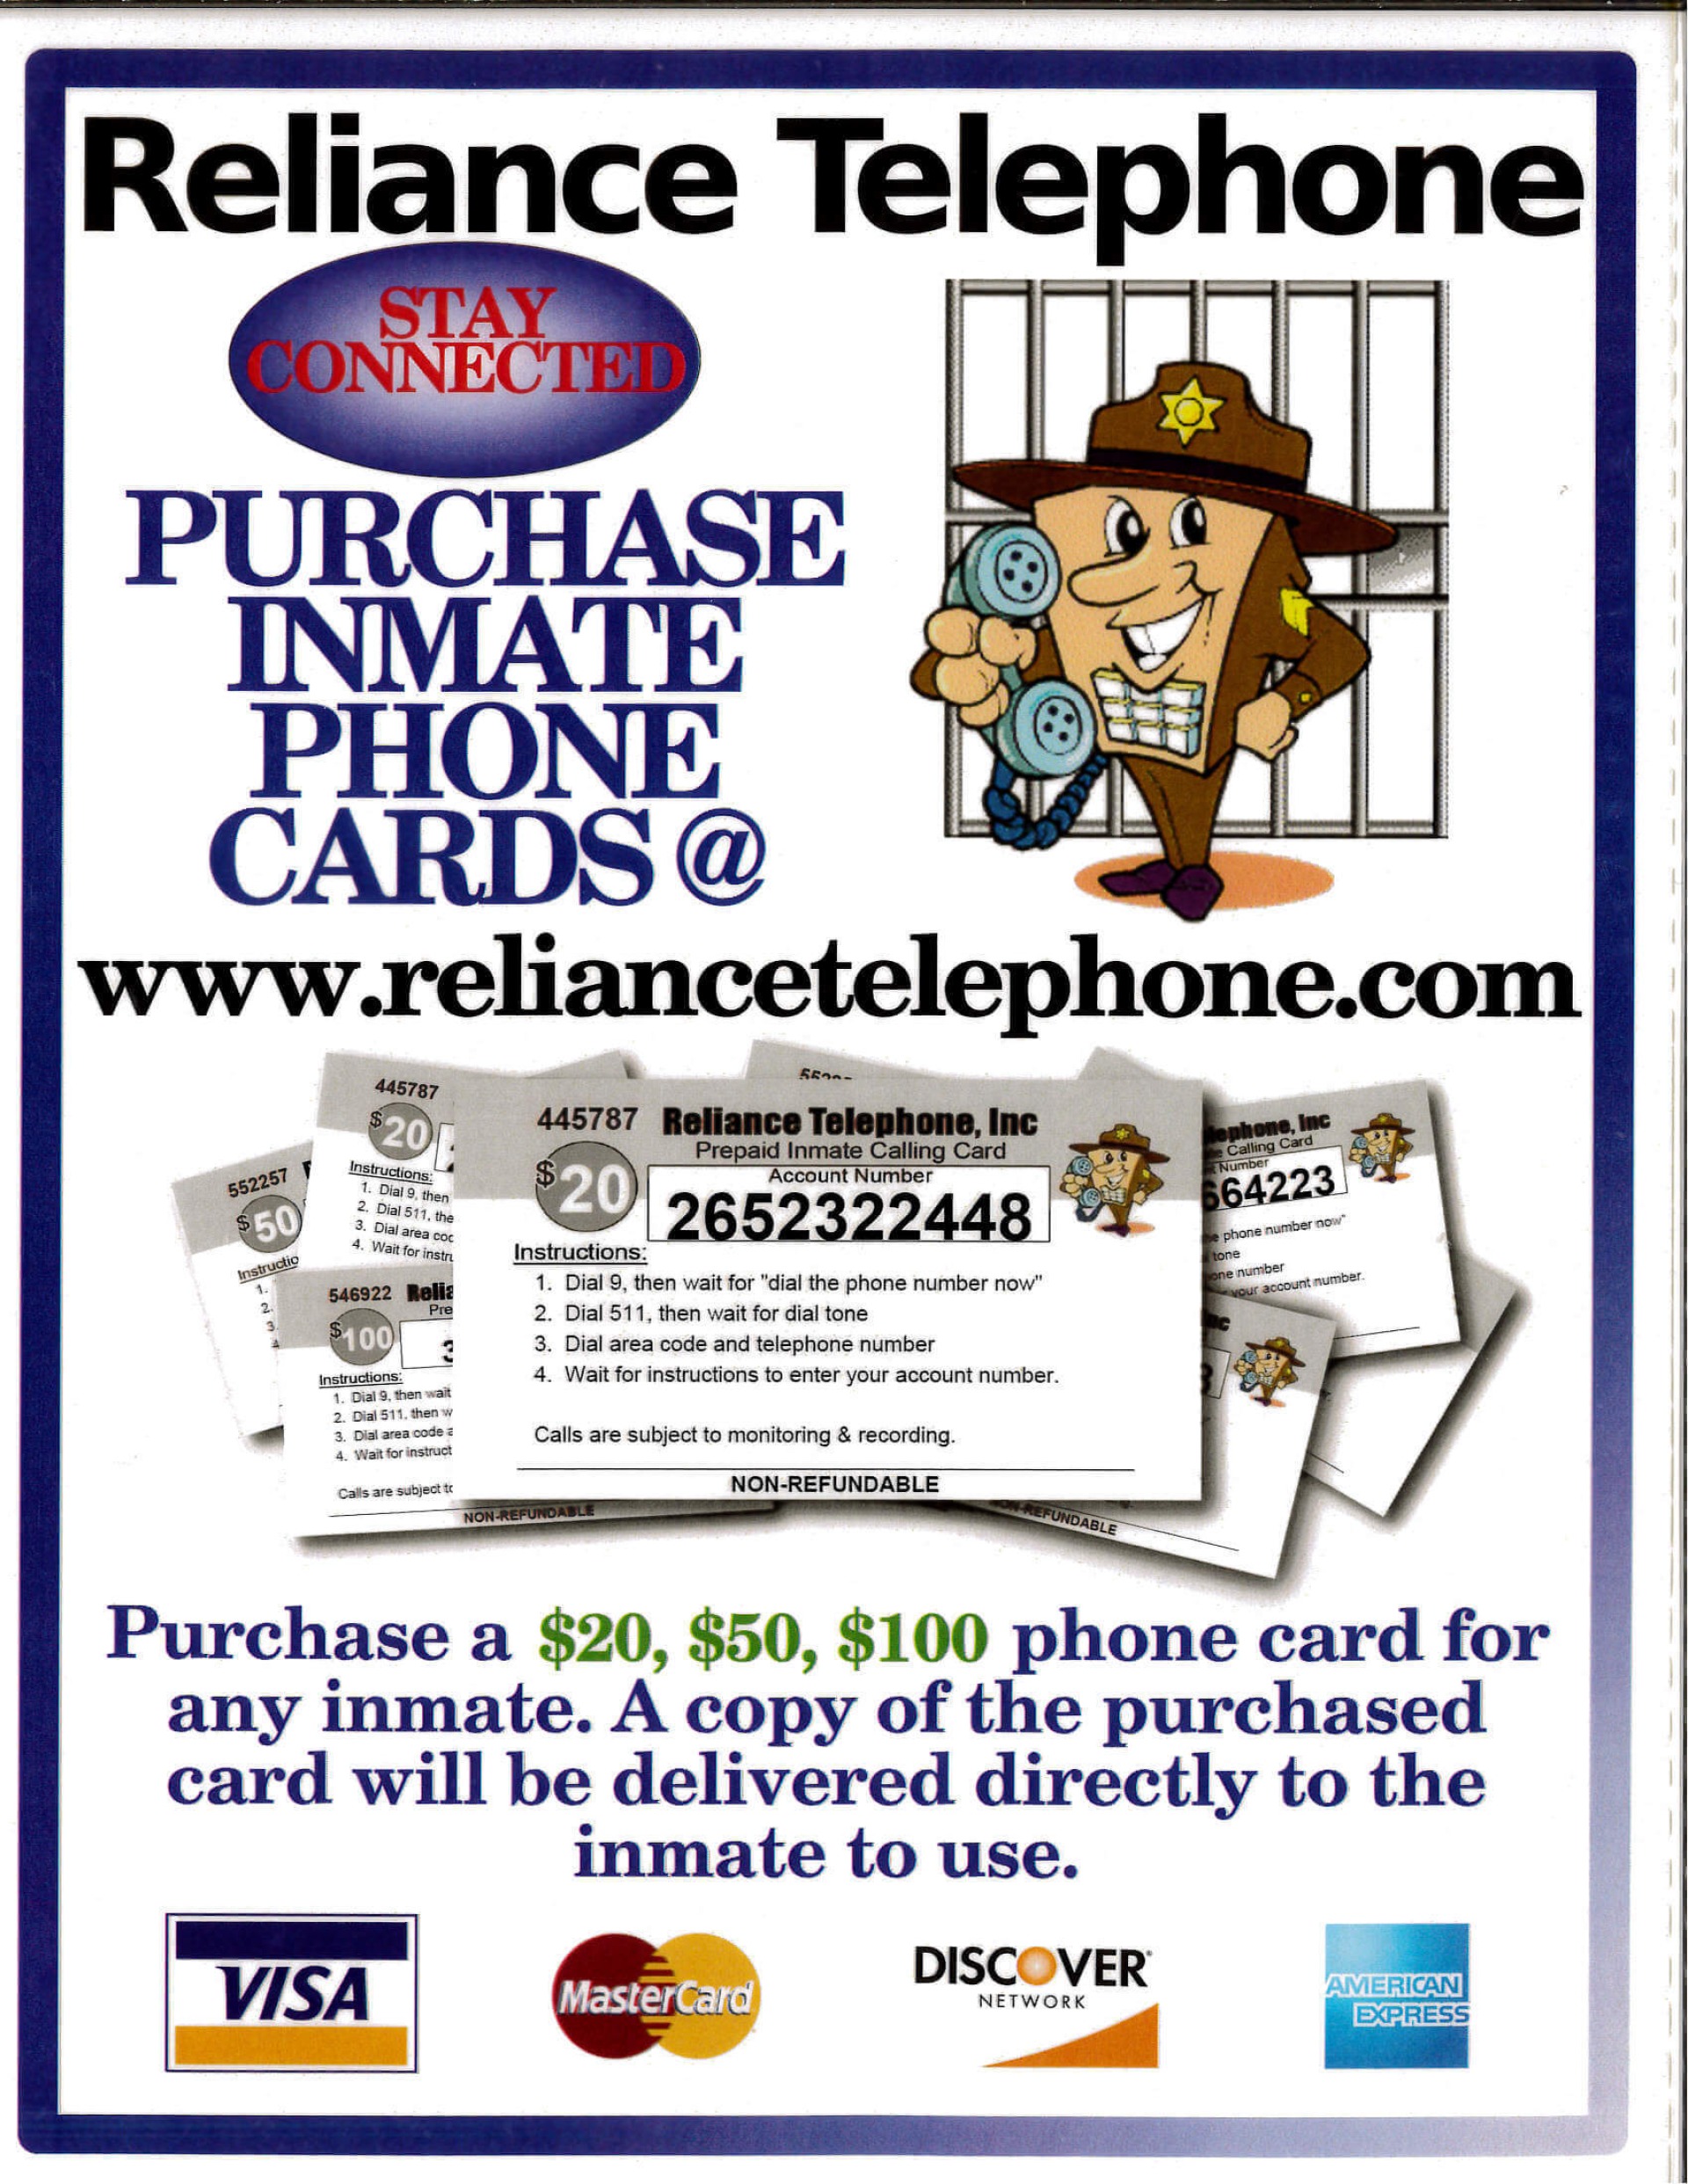 Reliance Telephone Stay Connected and Purchase Inmate Phone Cards.